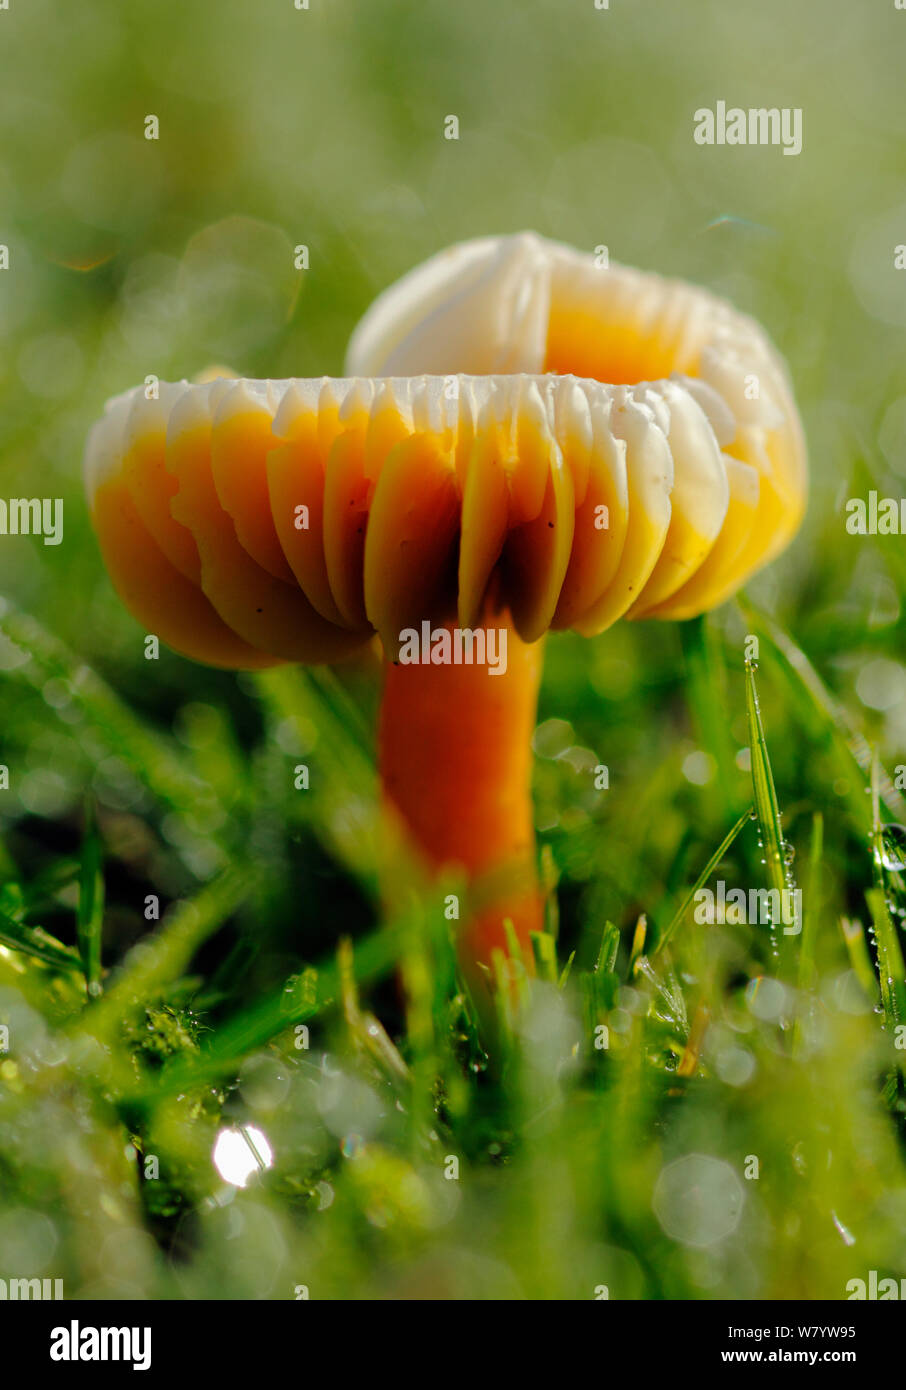 Parrot waxcap fungi (Hygrocybe psittacinus) growing from dewy grassland. South-west London, UK, November. Stock Photo